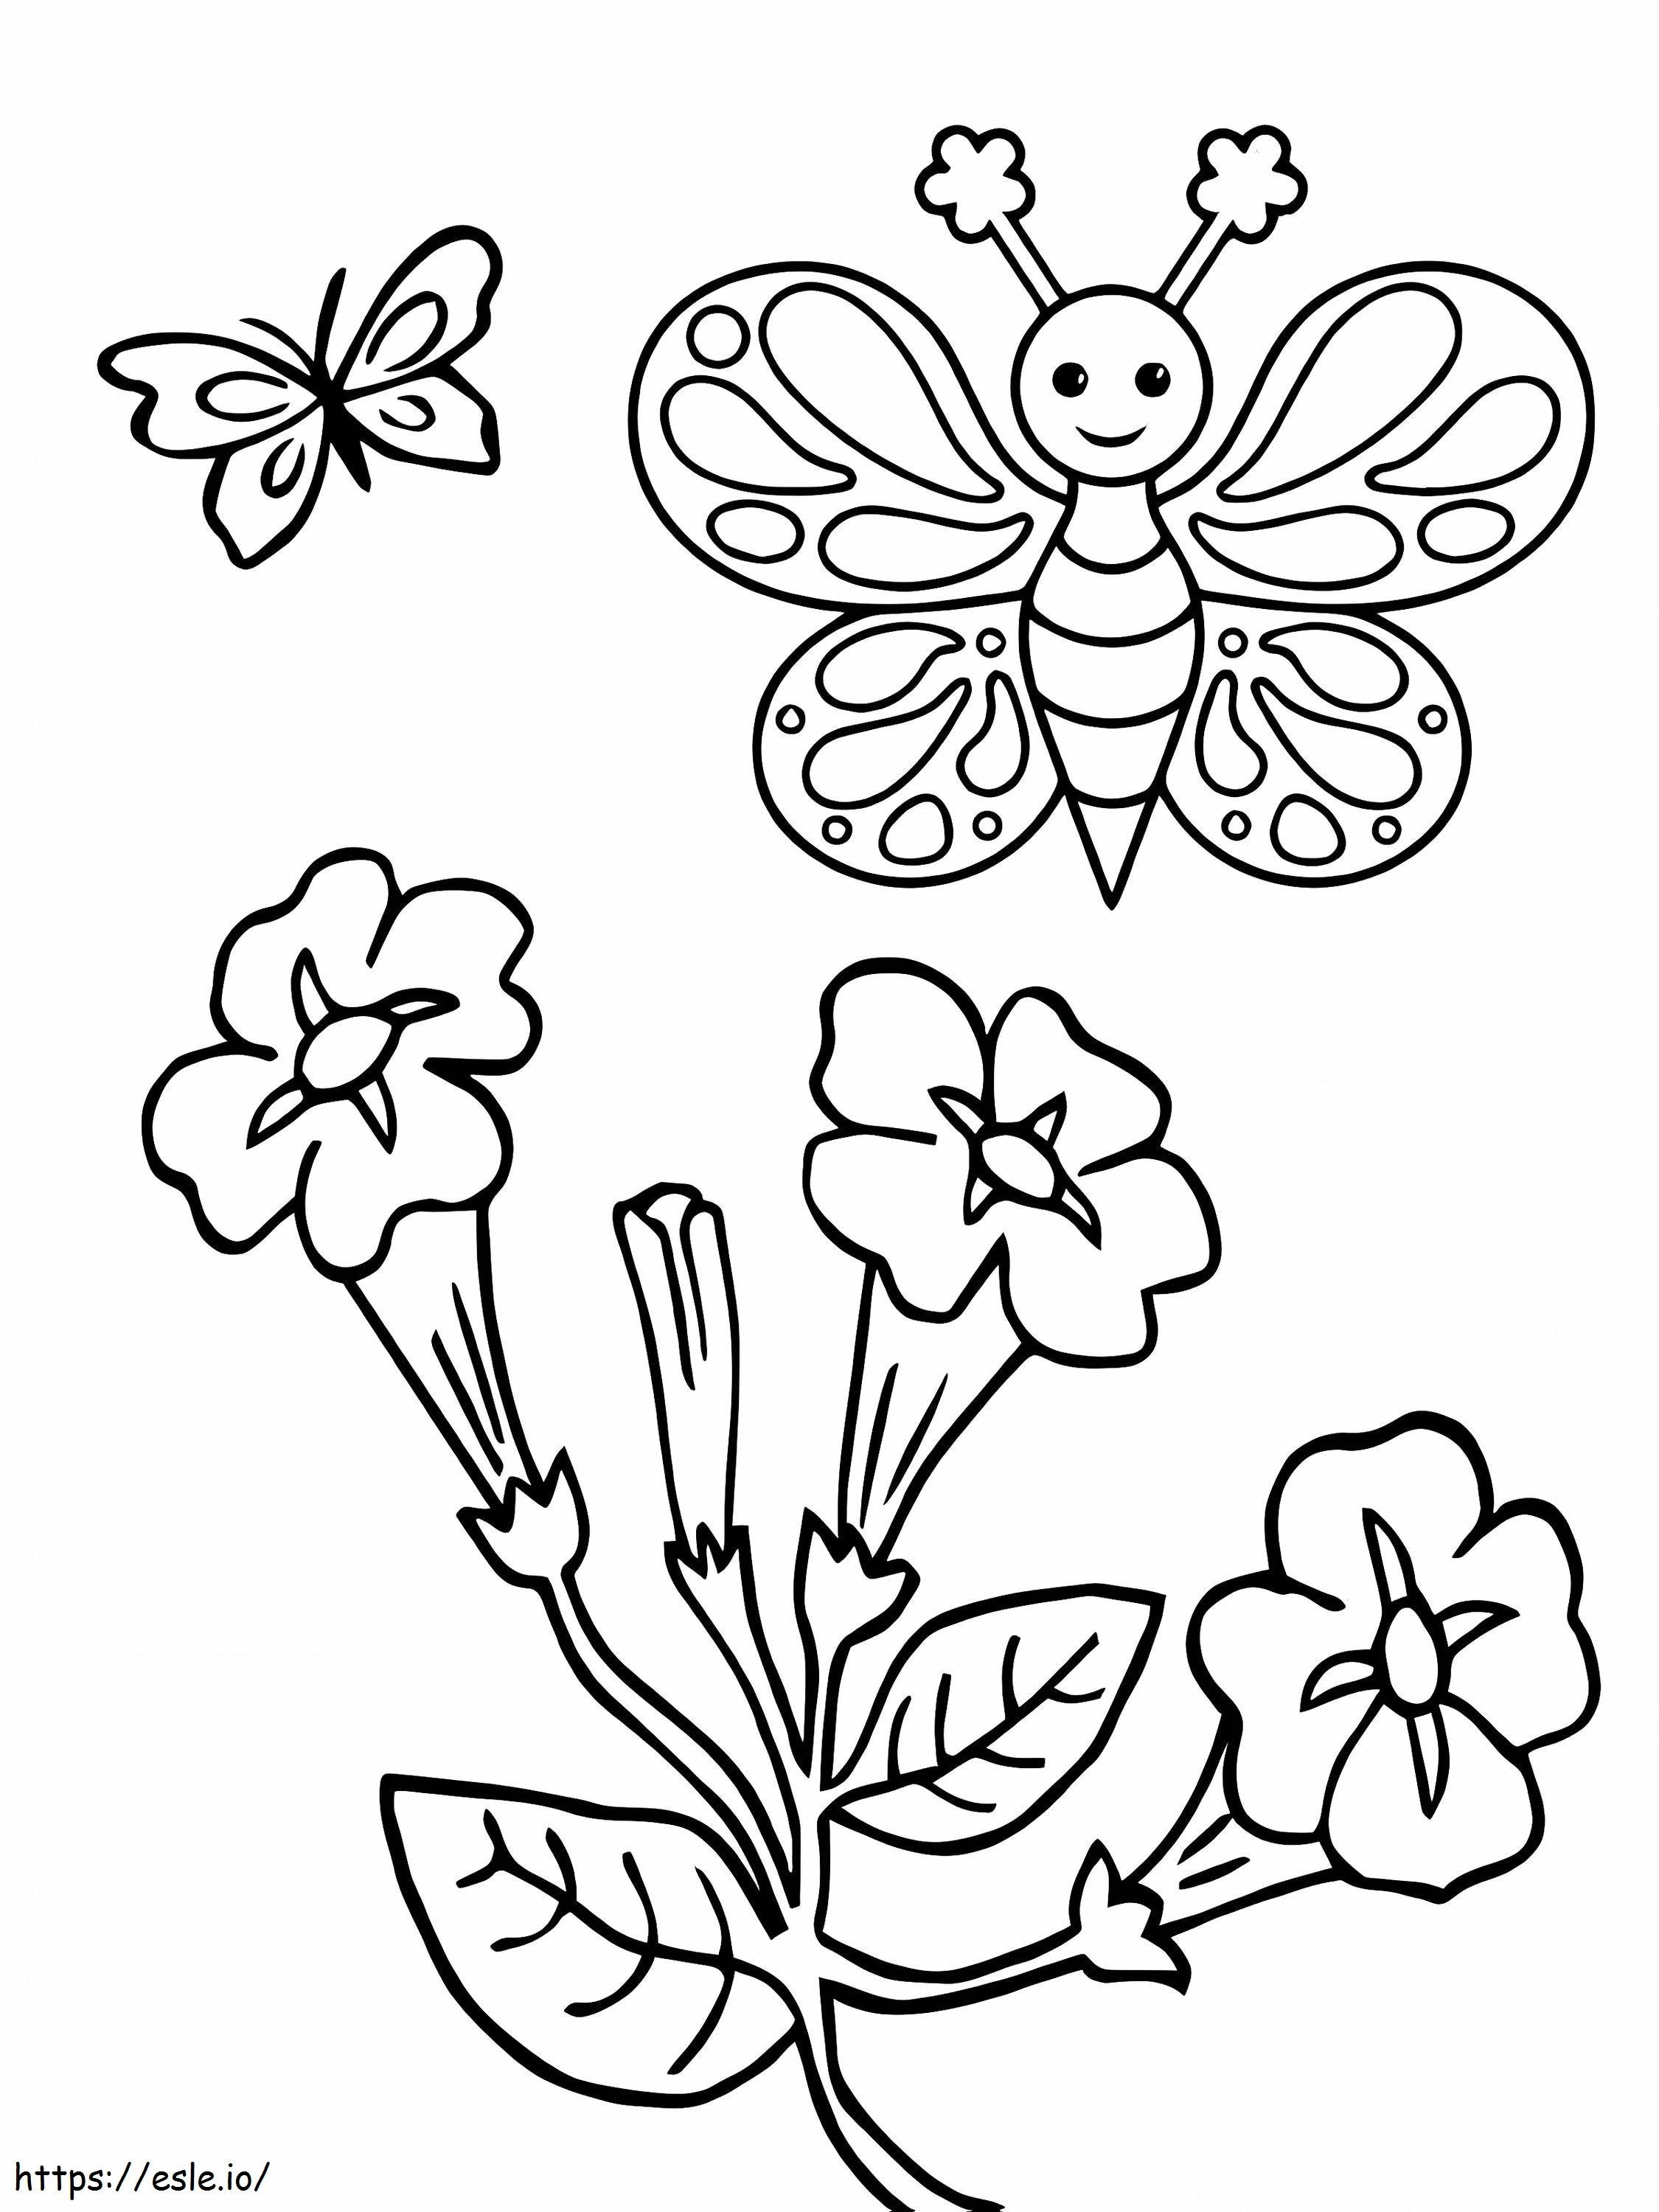 Cute Butterfly And Daffodils coloring page